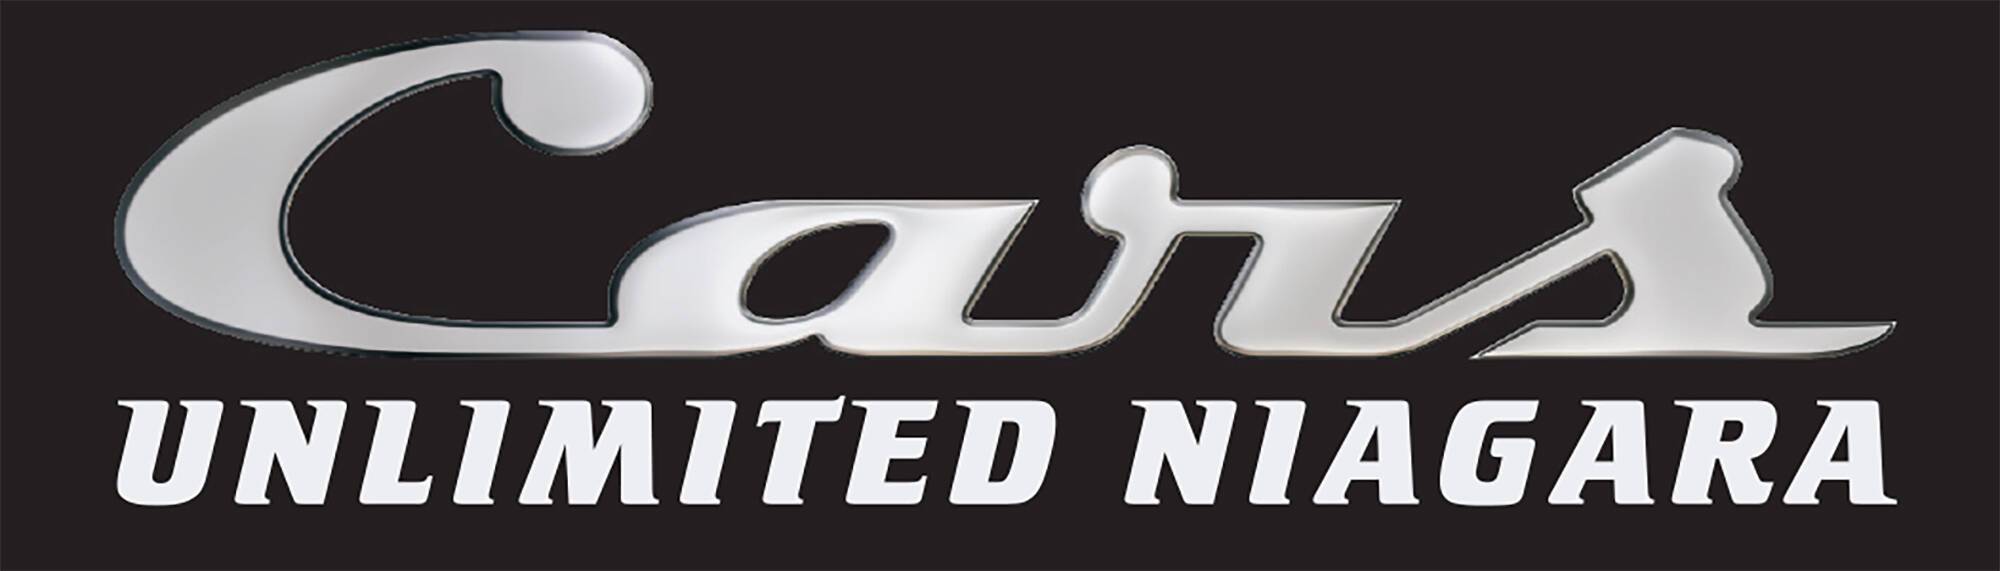 Cars Unlimited